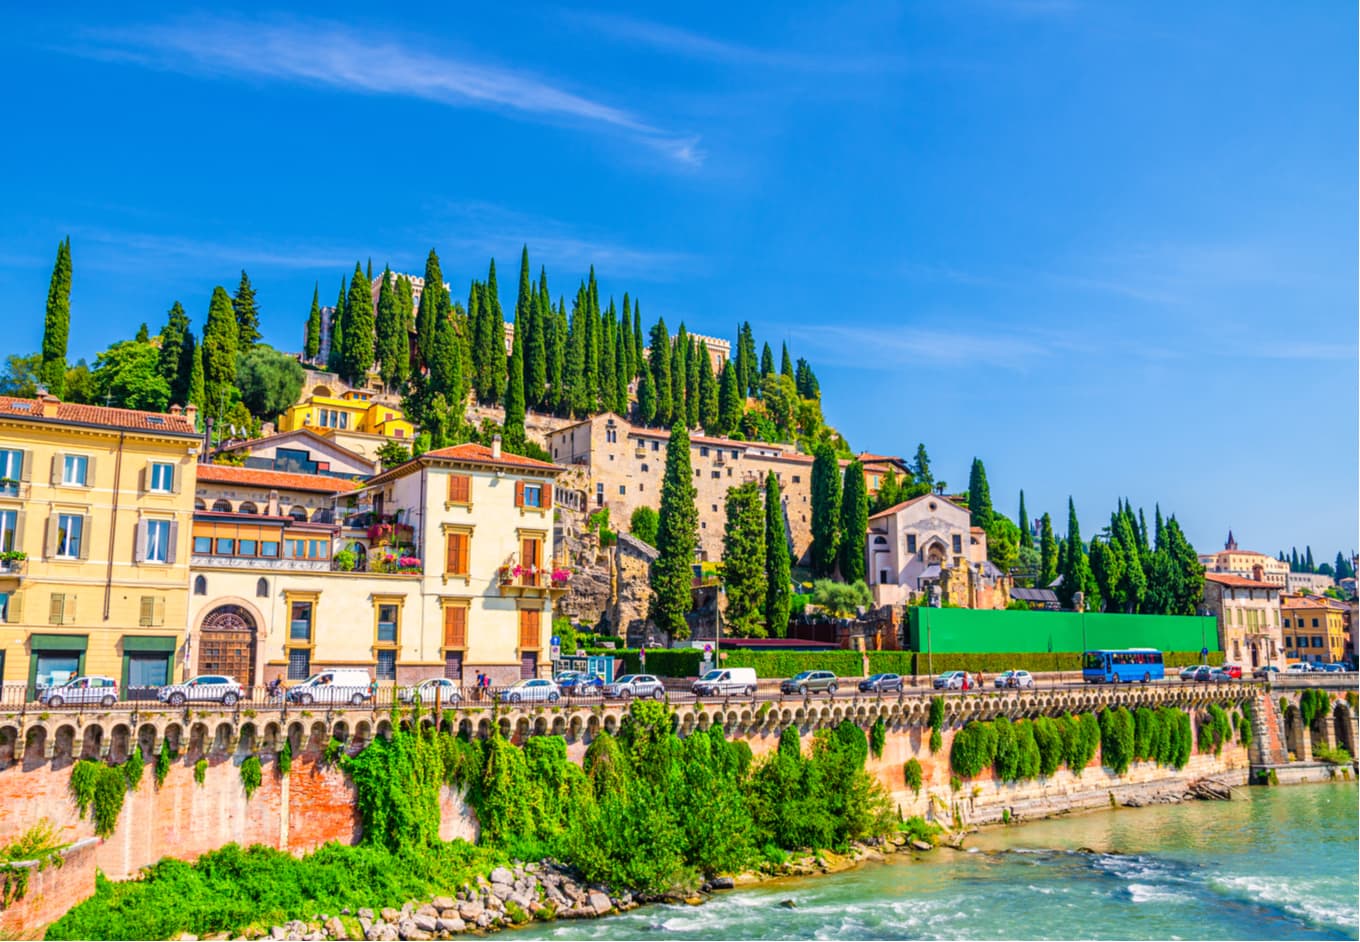 64 Fun & Unusual Things to Do in Verona, Italy - TourScanner